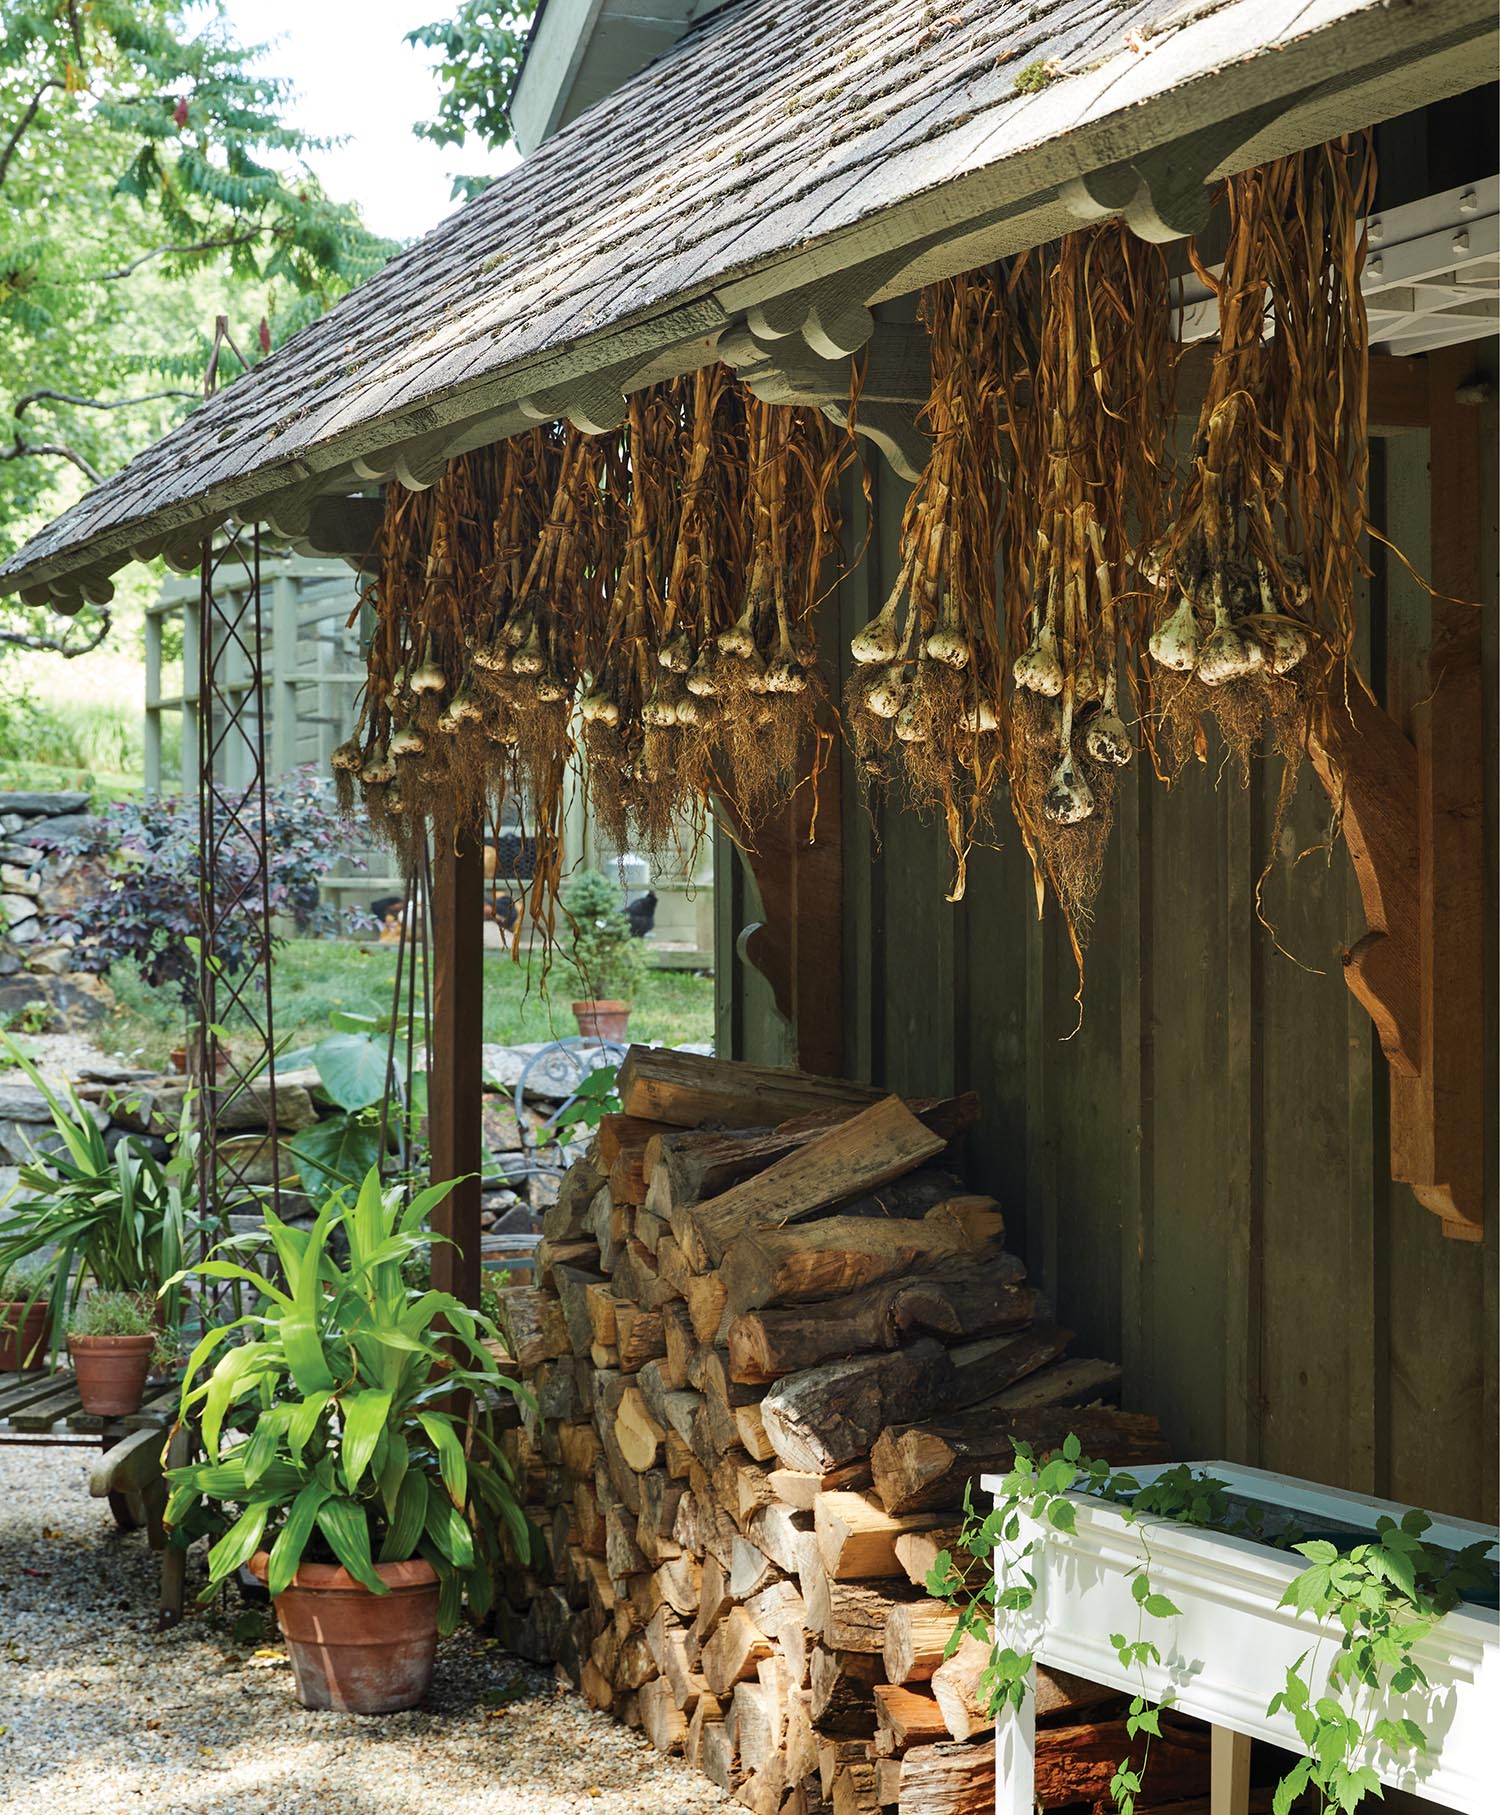 Dried flowers hang over chopped wood.